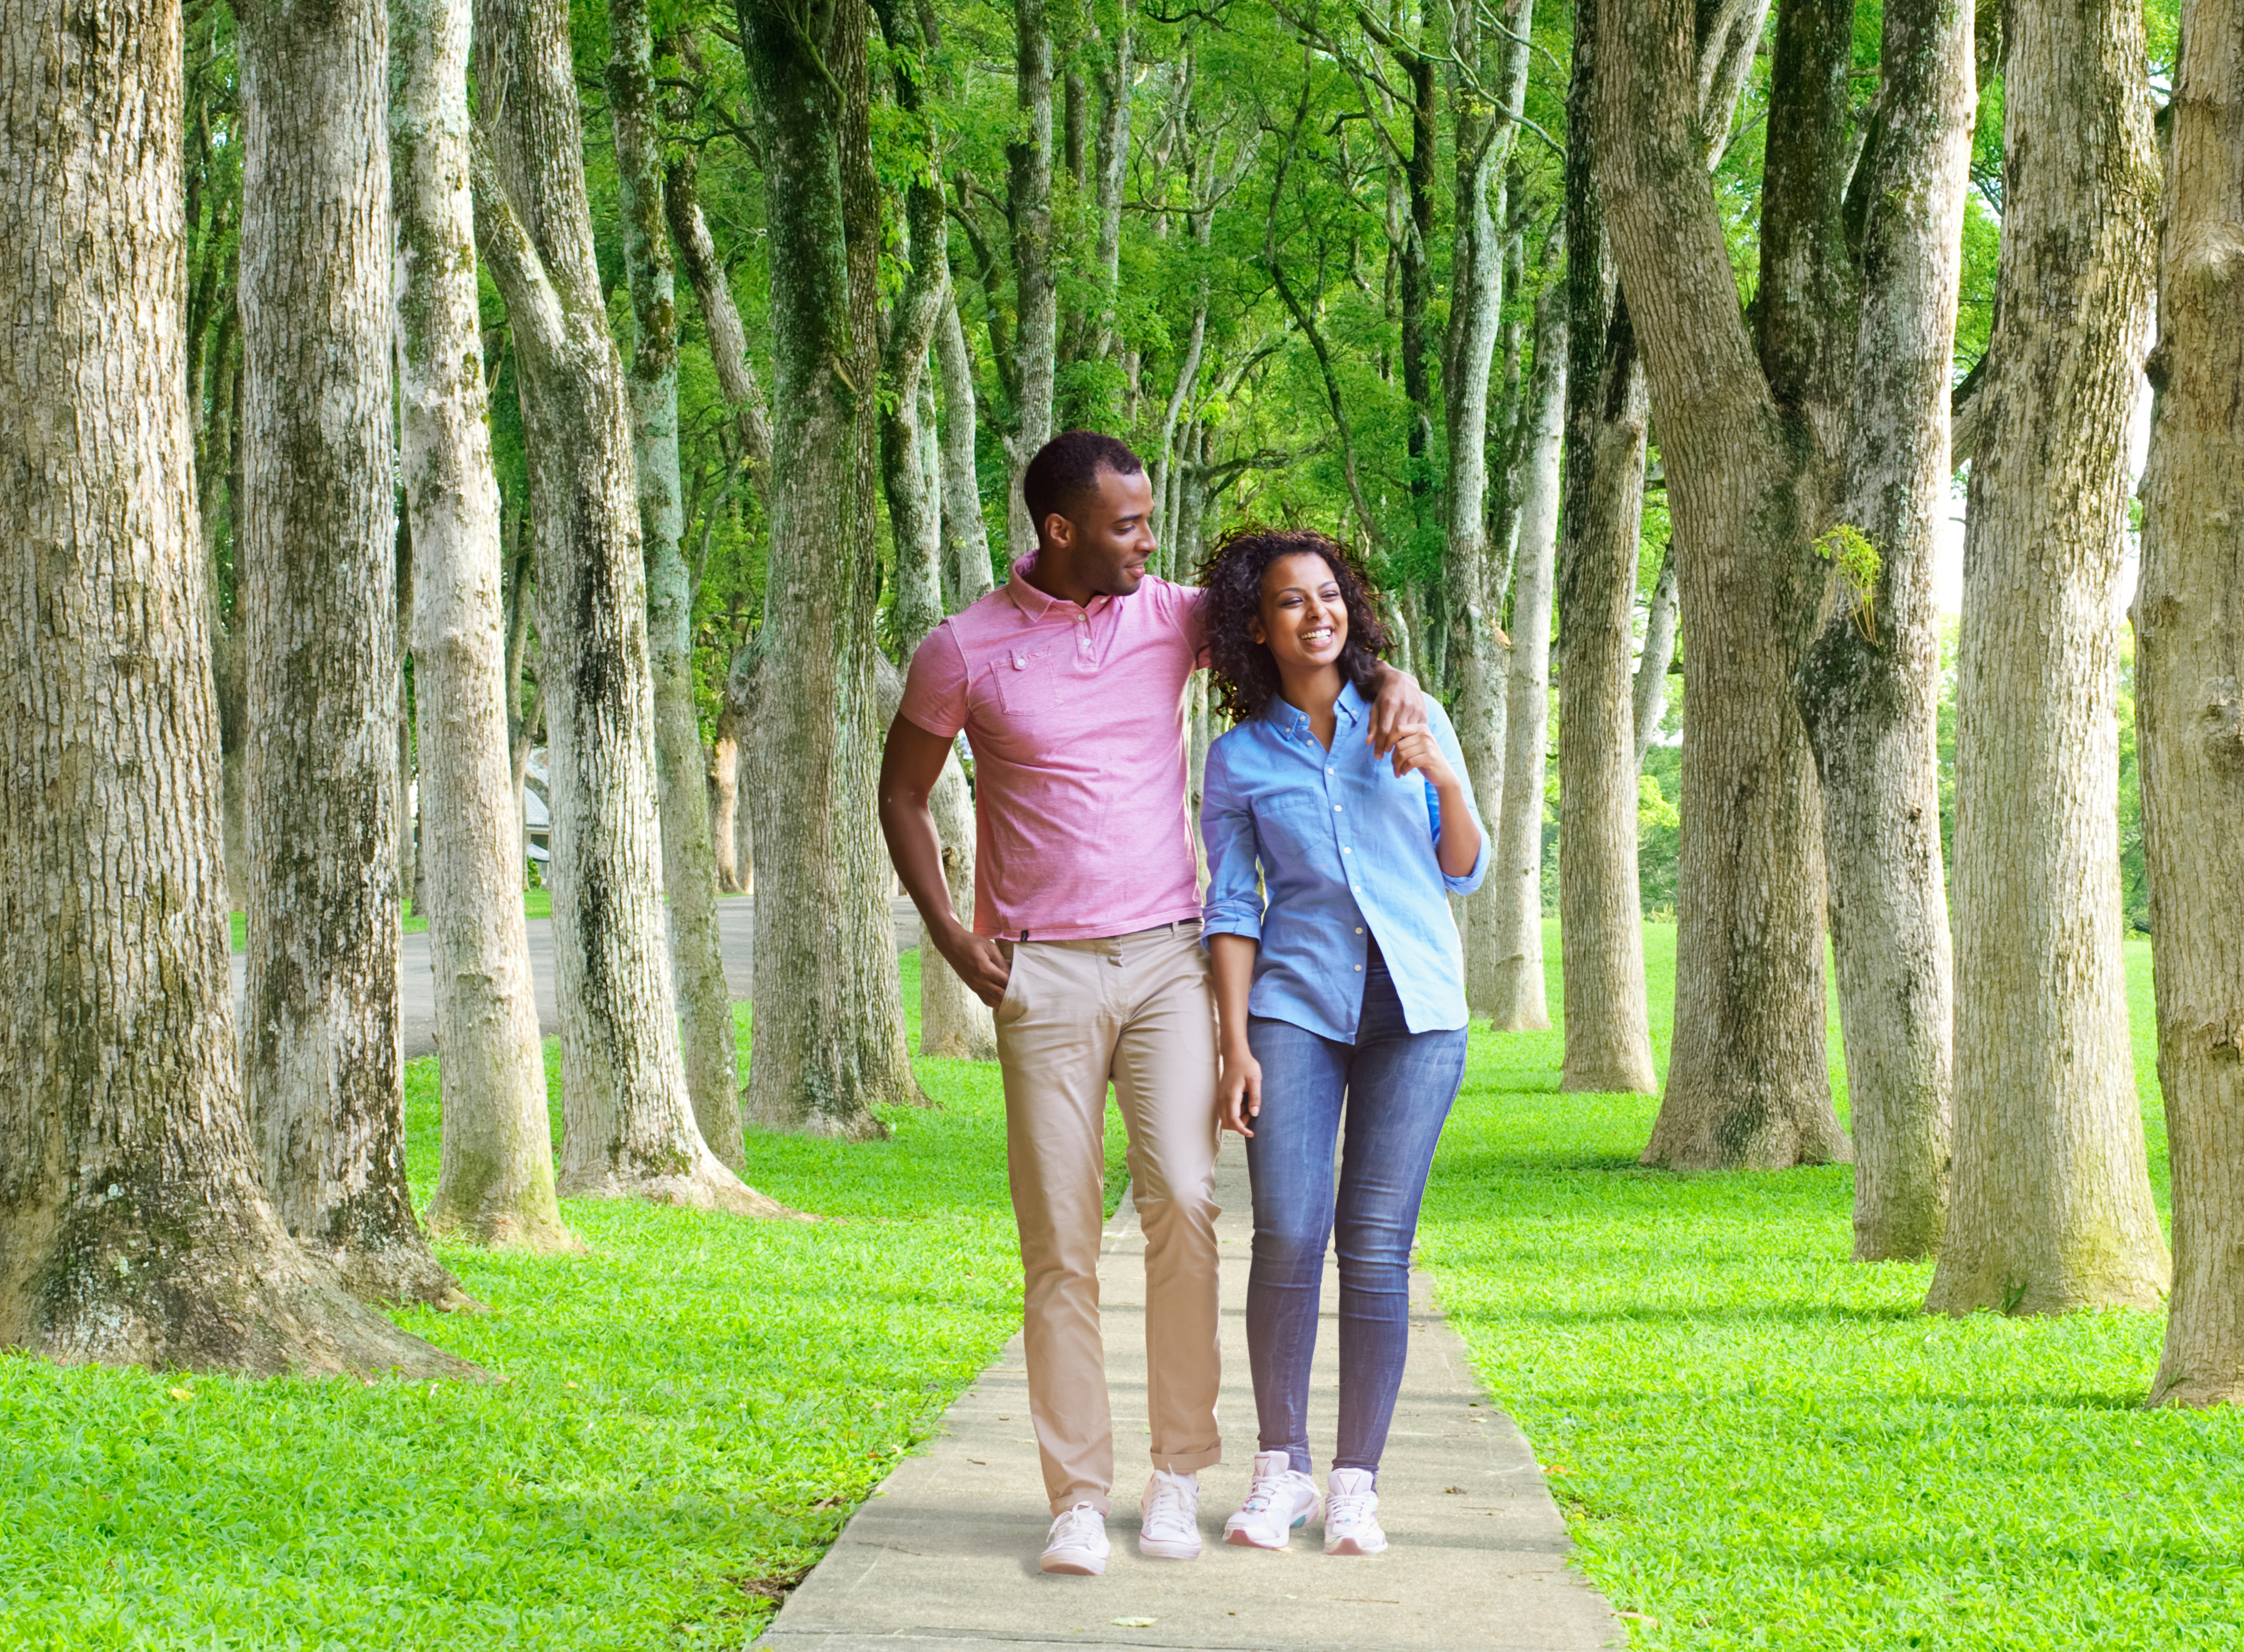 March 30 Special Events - Take A Walk Day. Image of a couple walking in a park hand in hand. Green grass surrounding them with tall trees. 